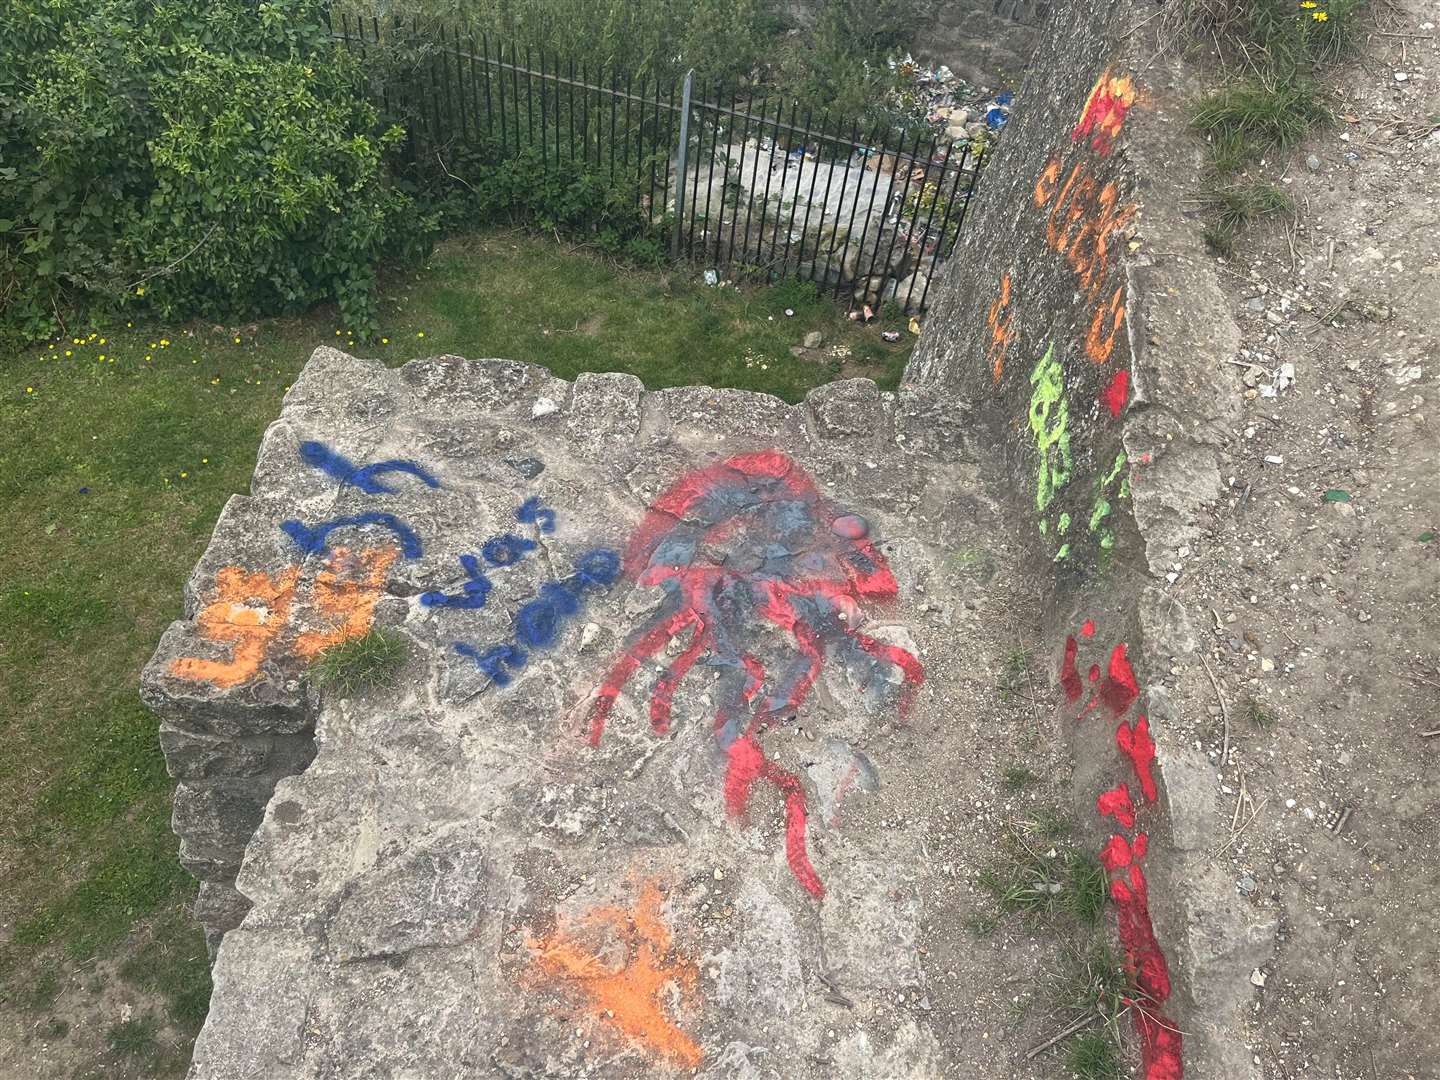 One resident described the graffiti on the castle as 'despicable'